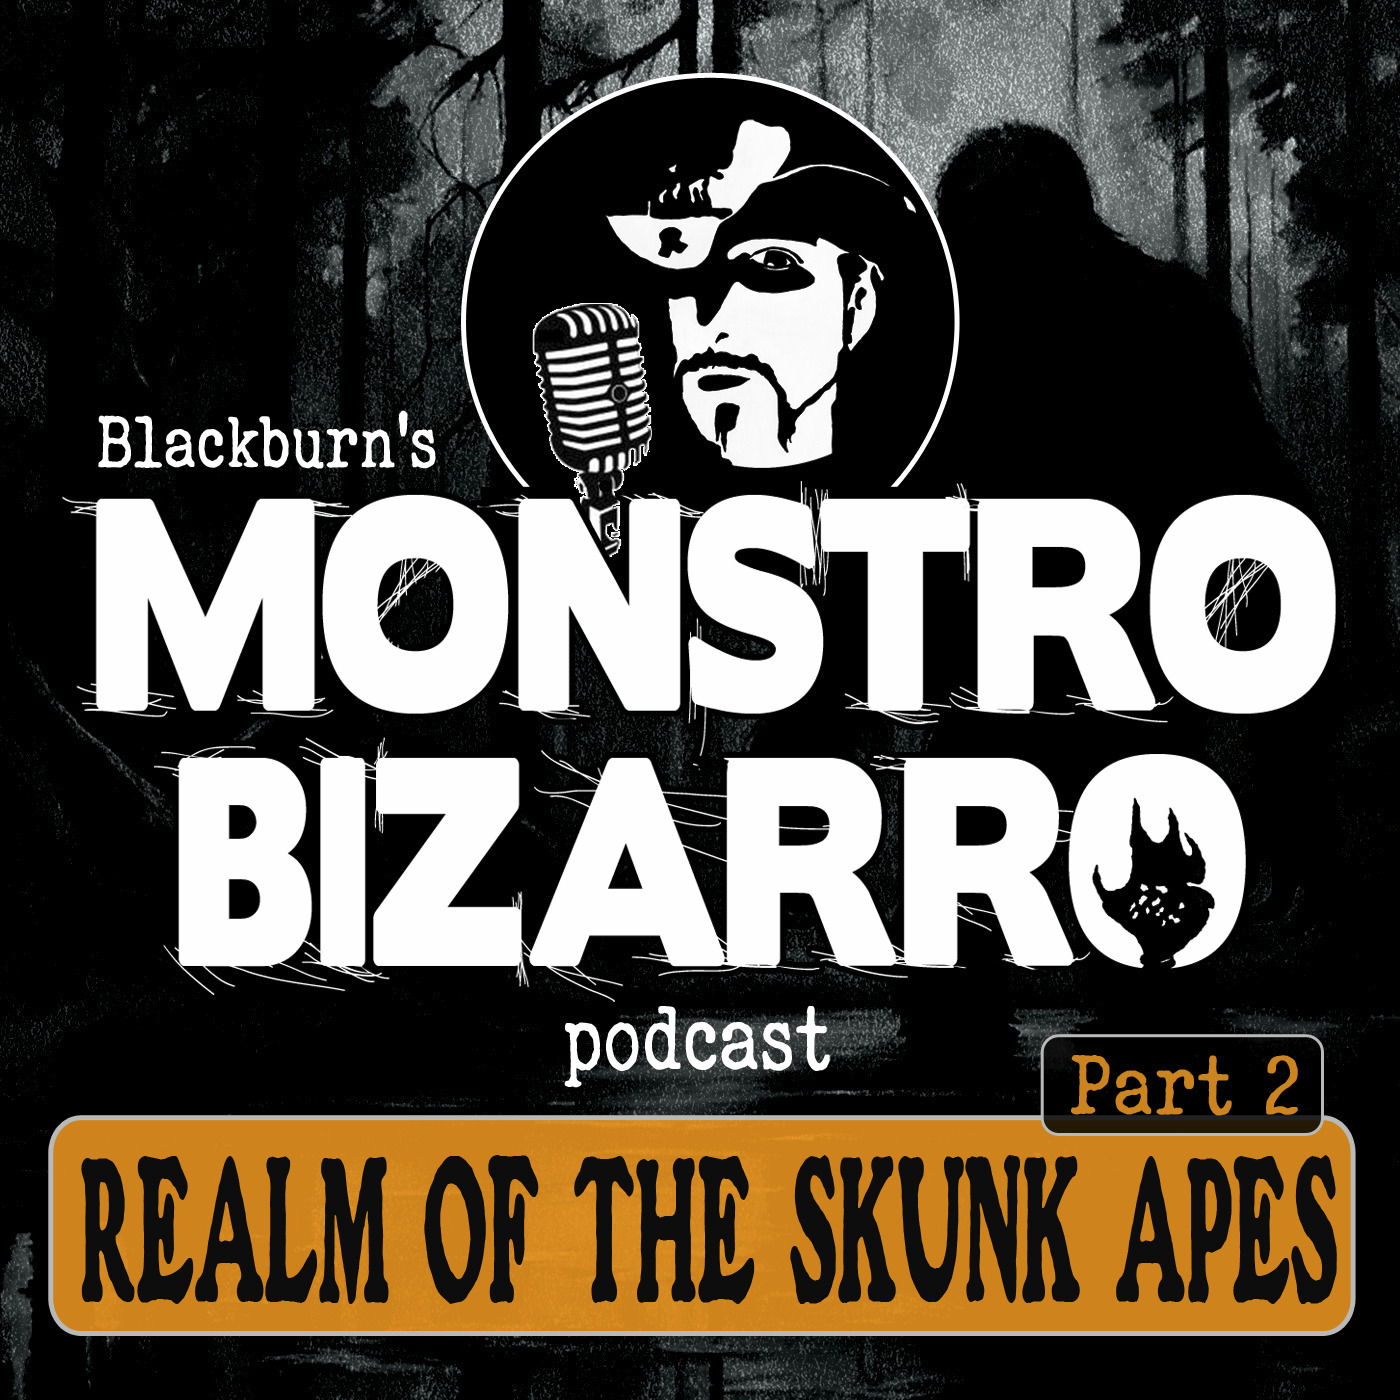 Realm of the Skunk Apes (Part 2)